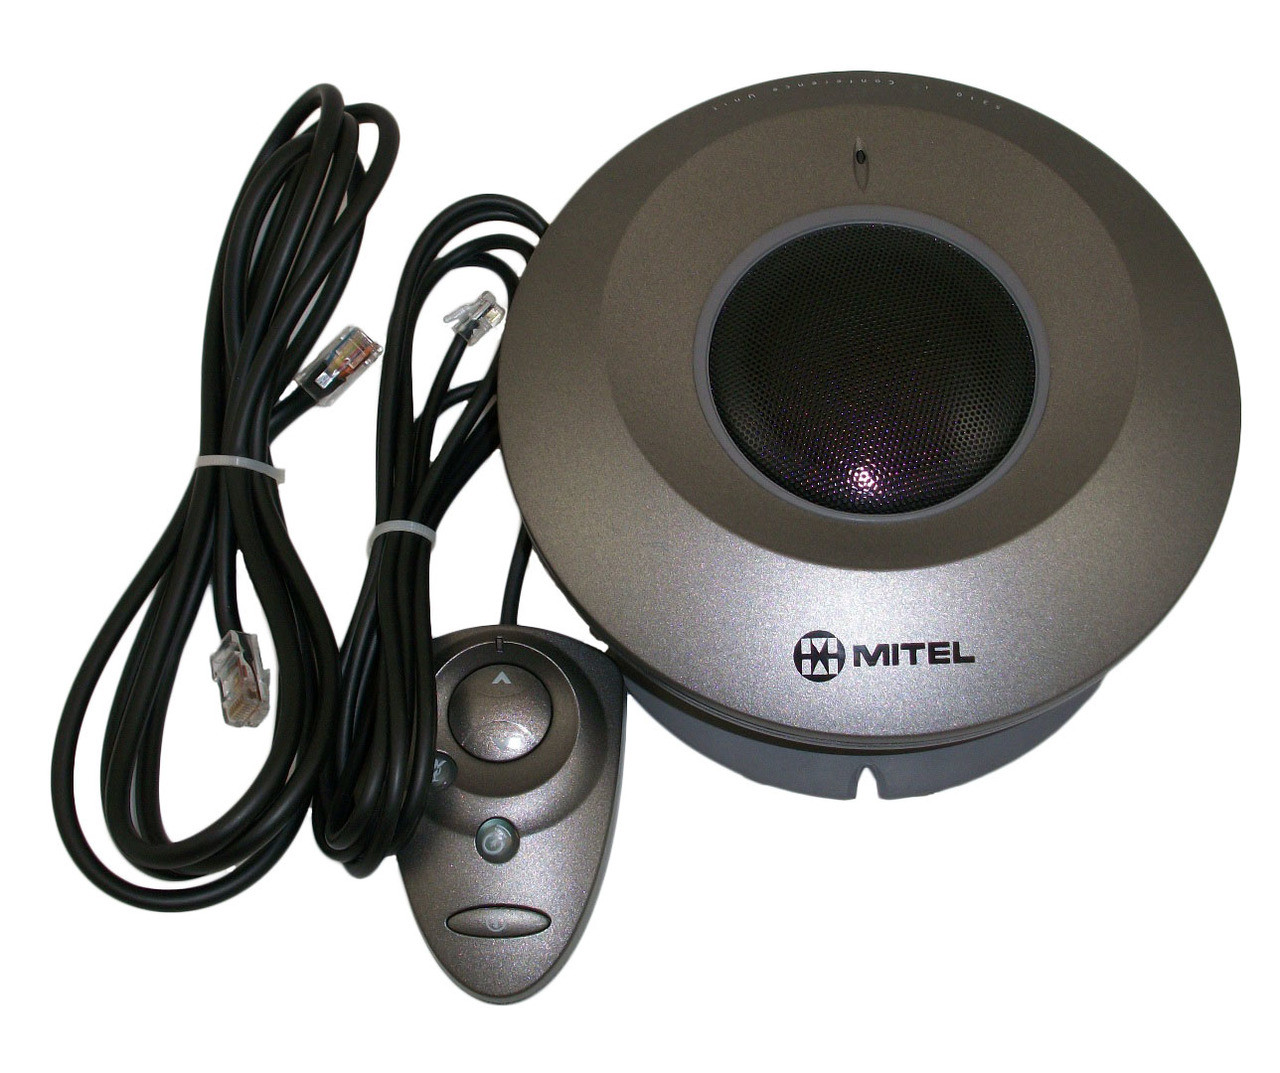 Mitel IP Conference Saucer 5310 50004459 w/ Mouse 50001543 